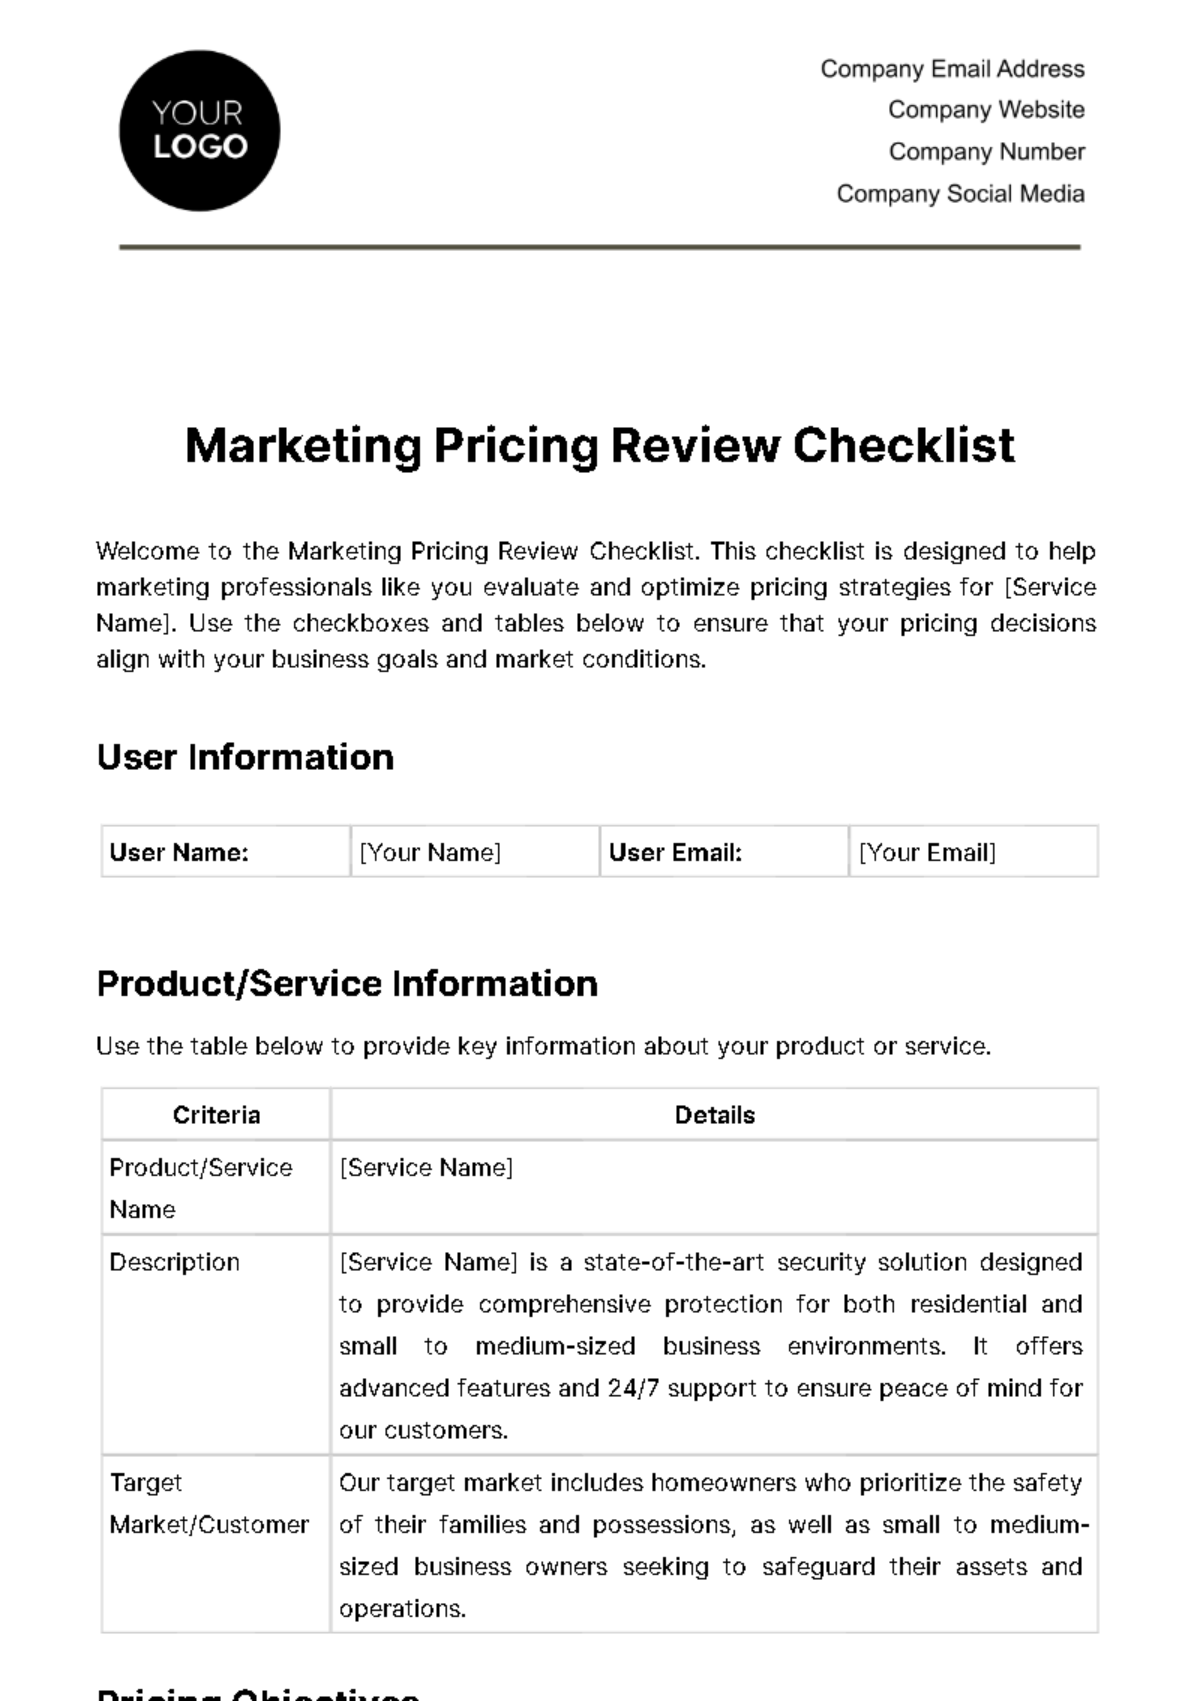 Marketing Pricing Review Checklist Template